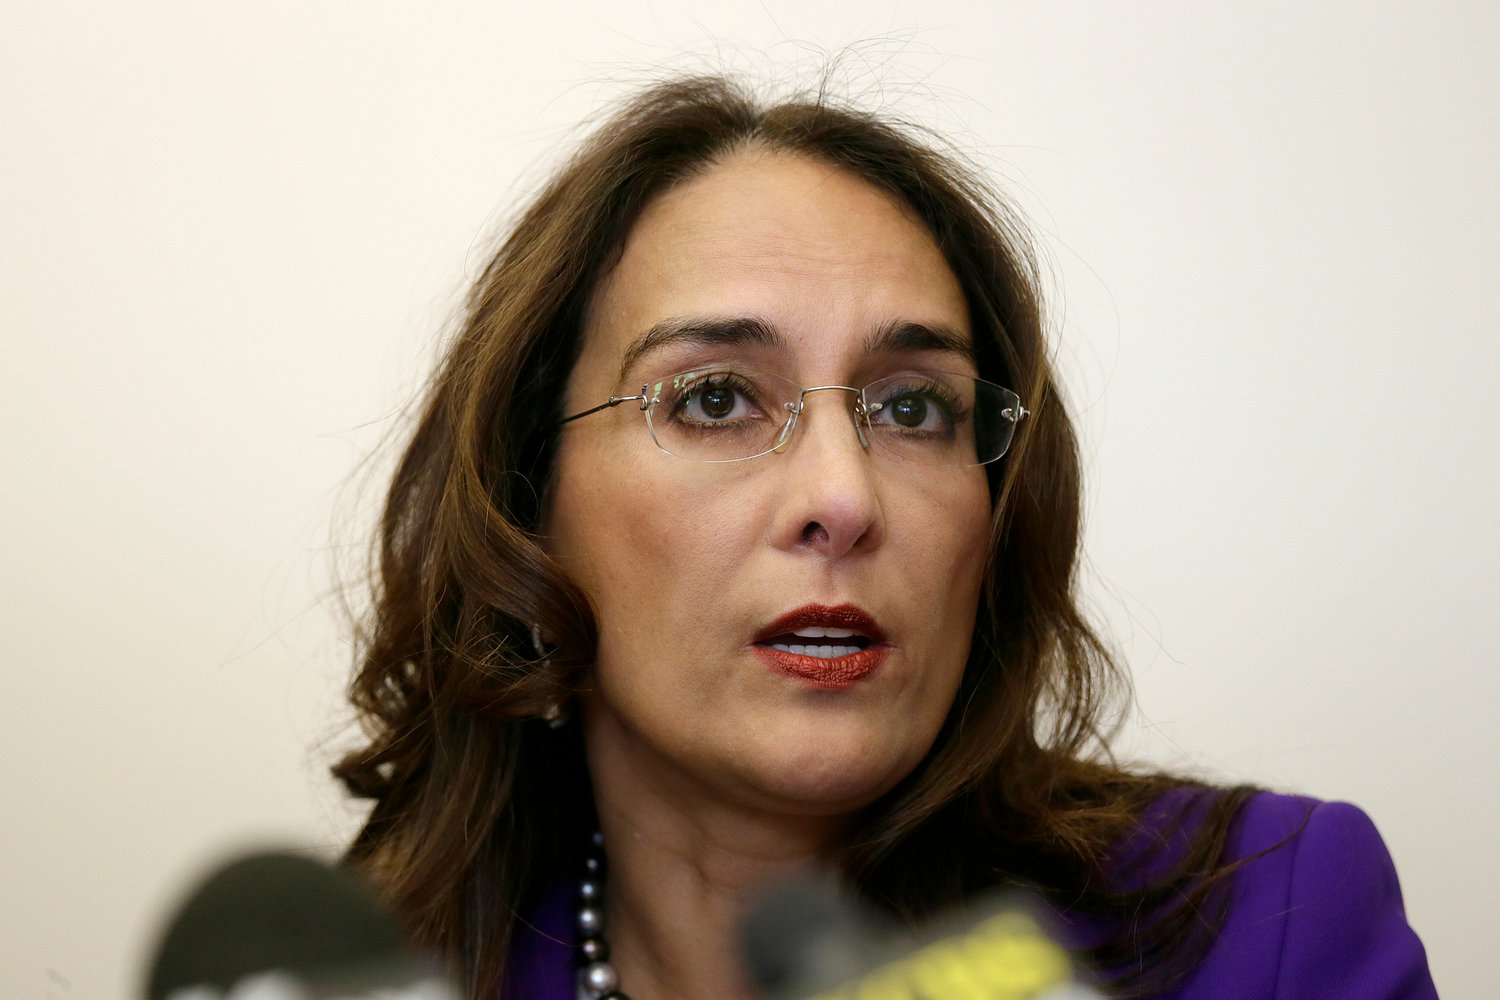 Attorney Harmeet Dhillon speaks during a news conference in San Francisco, April 24, 2017. The race for RNC chair will be decided on Friday by secret ballot as Republican officials from all 50 states gather in Southern California. Current RNC Chair Ronna McDaniel is fighting for reelection against Dhillon, one of former President Donald Trump’s attorneys.